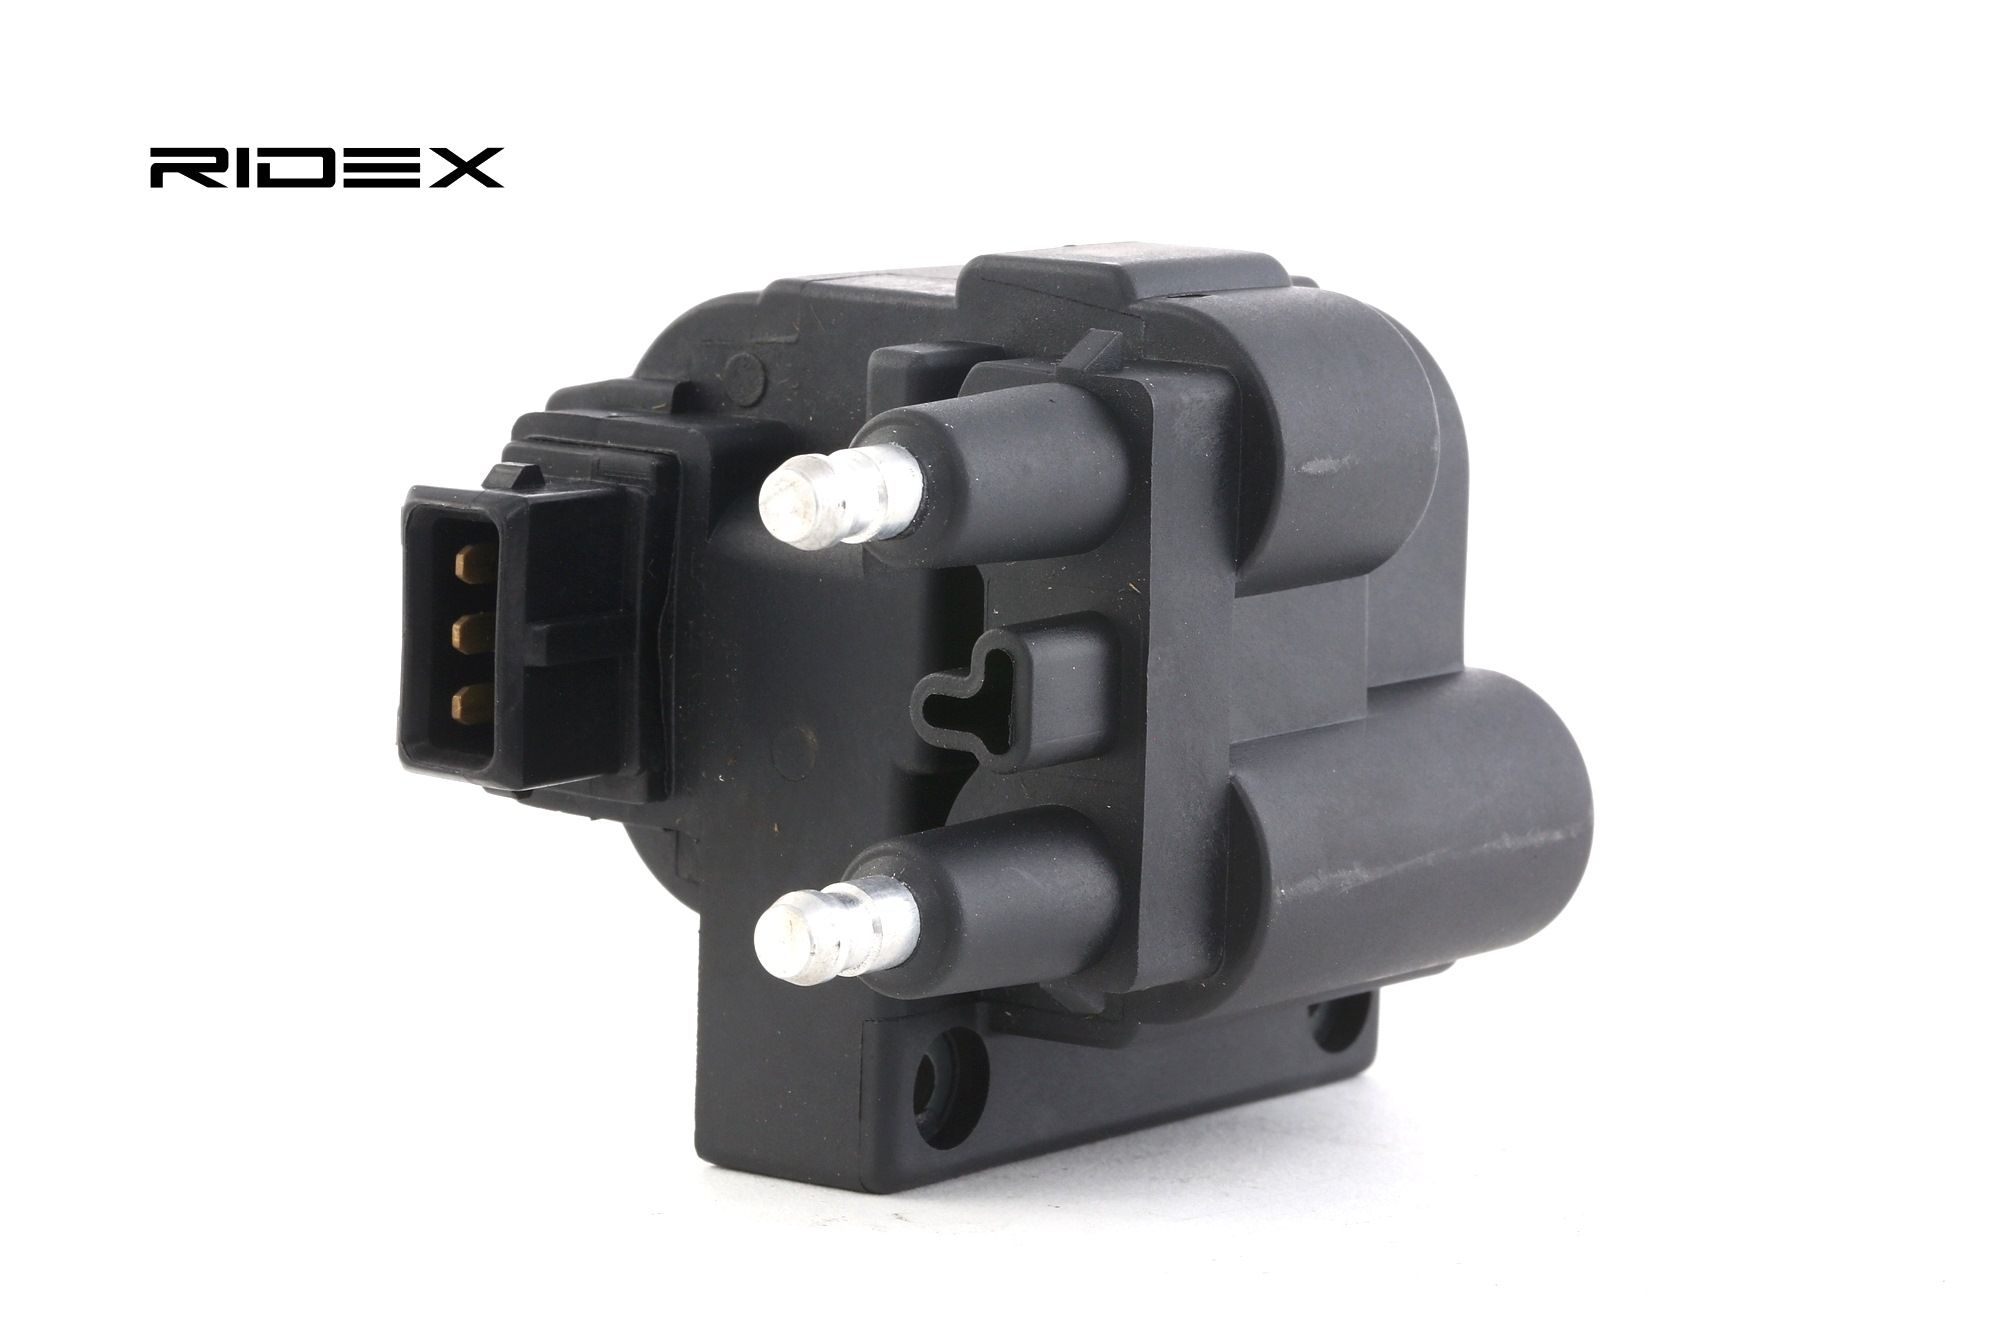 Image of RIDEX Ignition coil RENAULT,VOLVO 689C0159 NEC10047,NEC10049,7700863020 Coil pack,Ignition coil pack,Engine coil,Engine coil pack 7700865923,GCL206